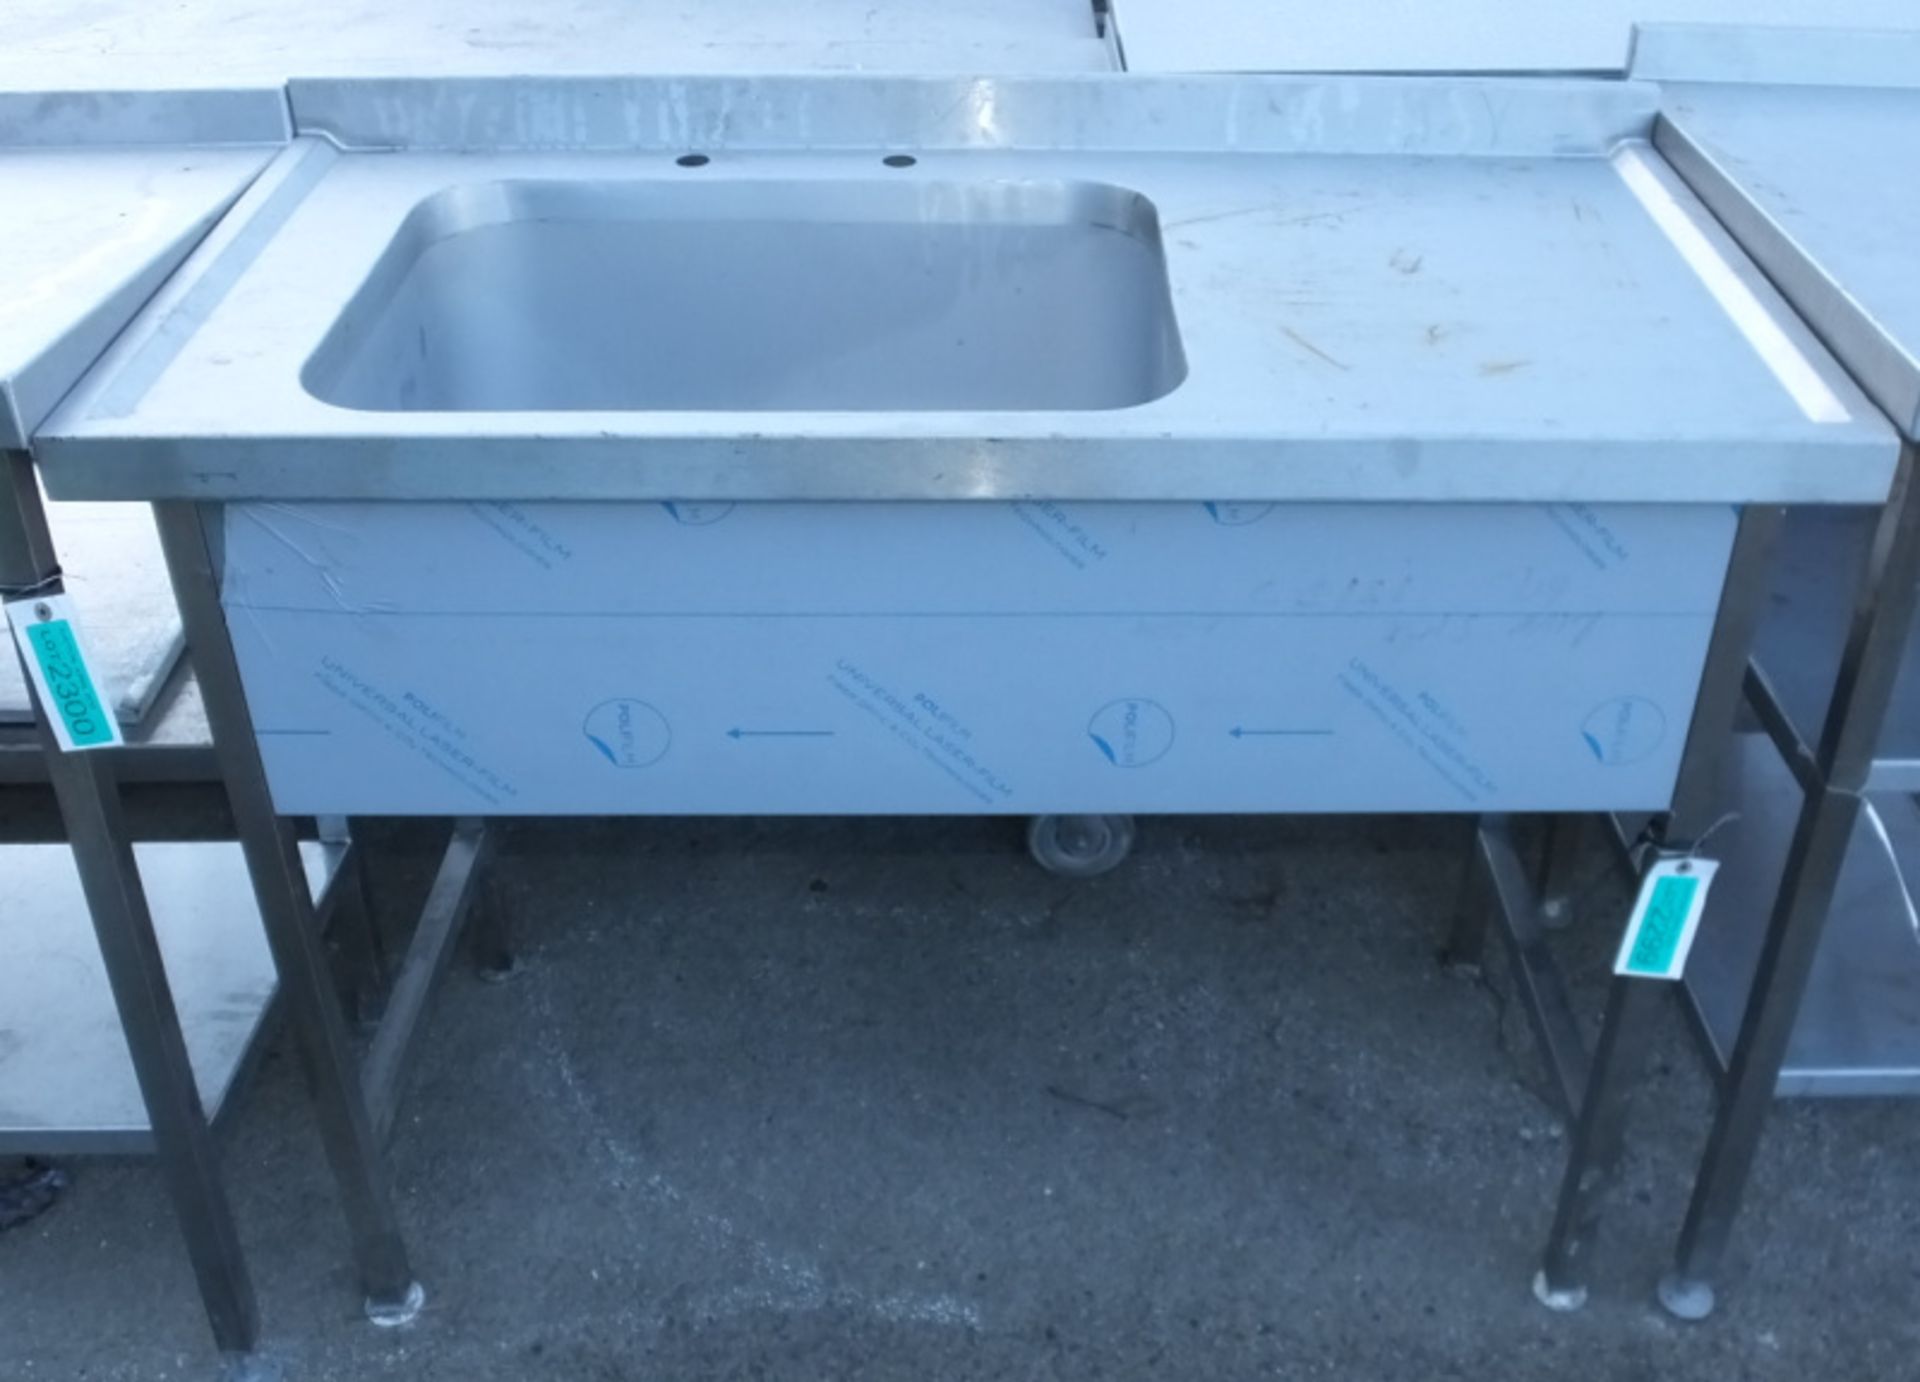 Stainless Steel Sink Unit Without Tap L 1200mm x W 600mm x H 900mm